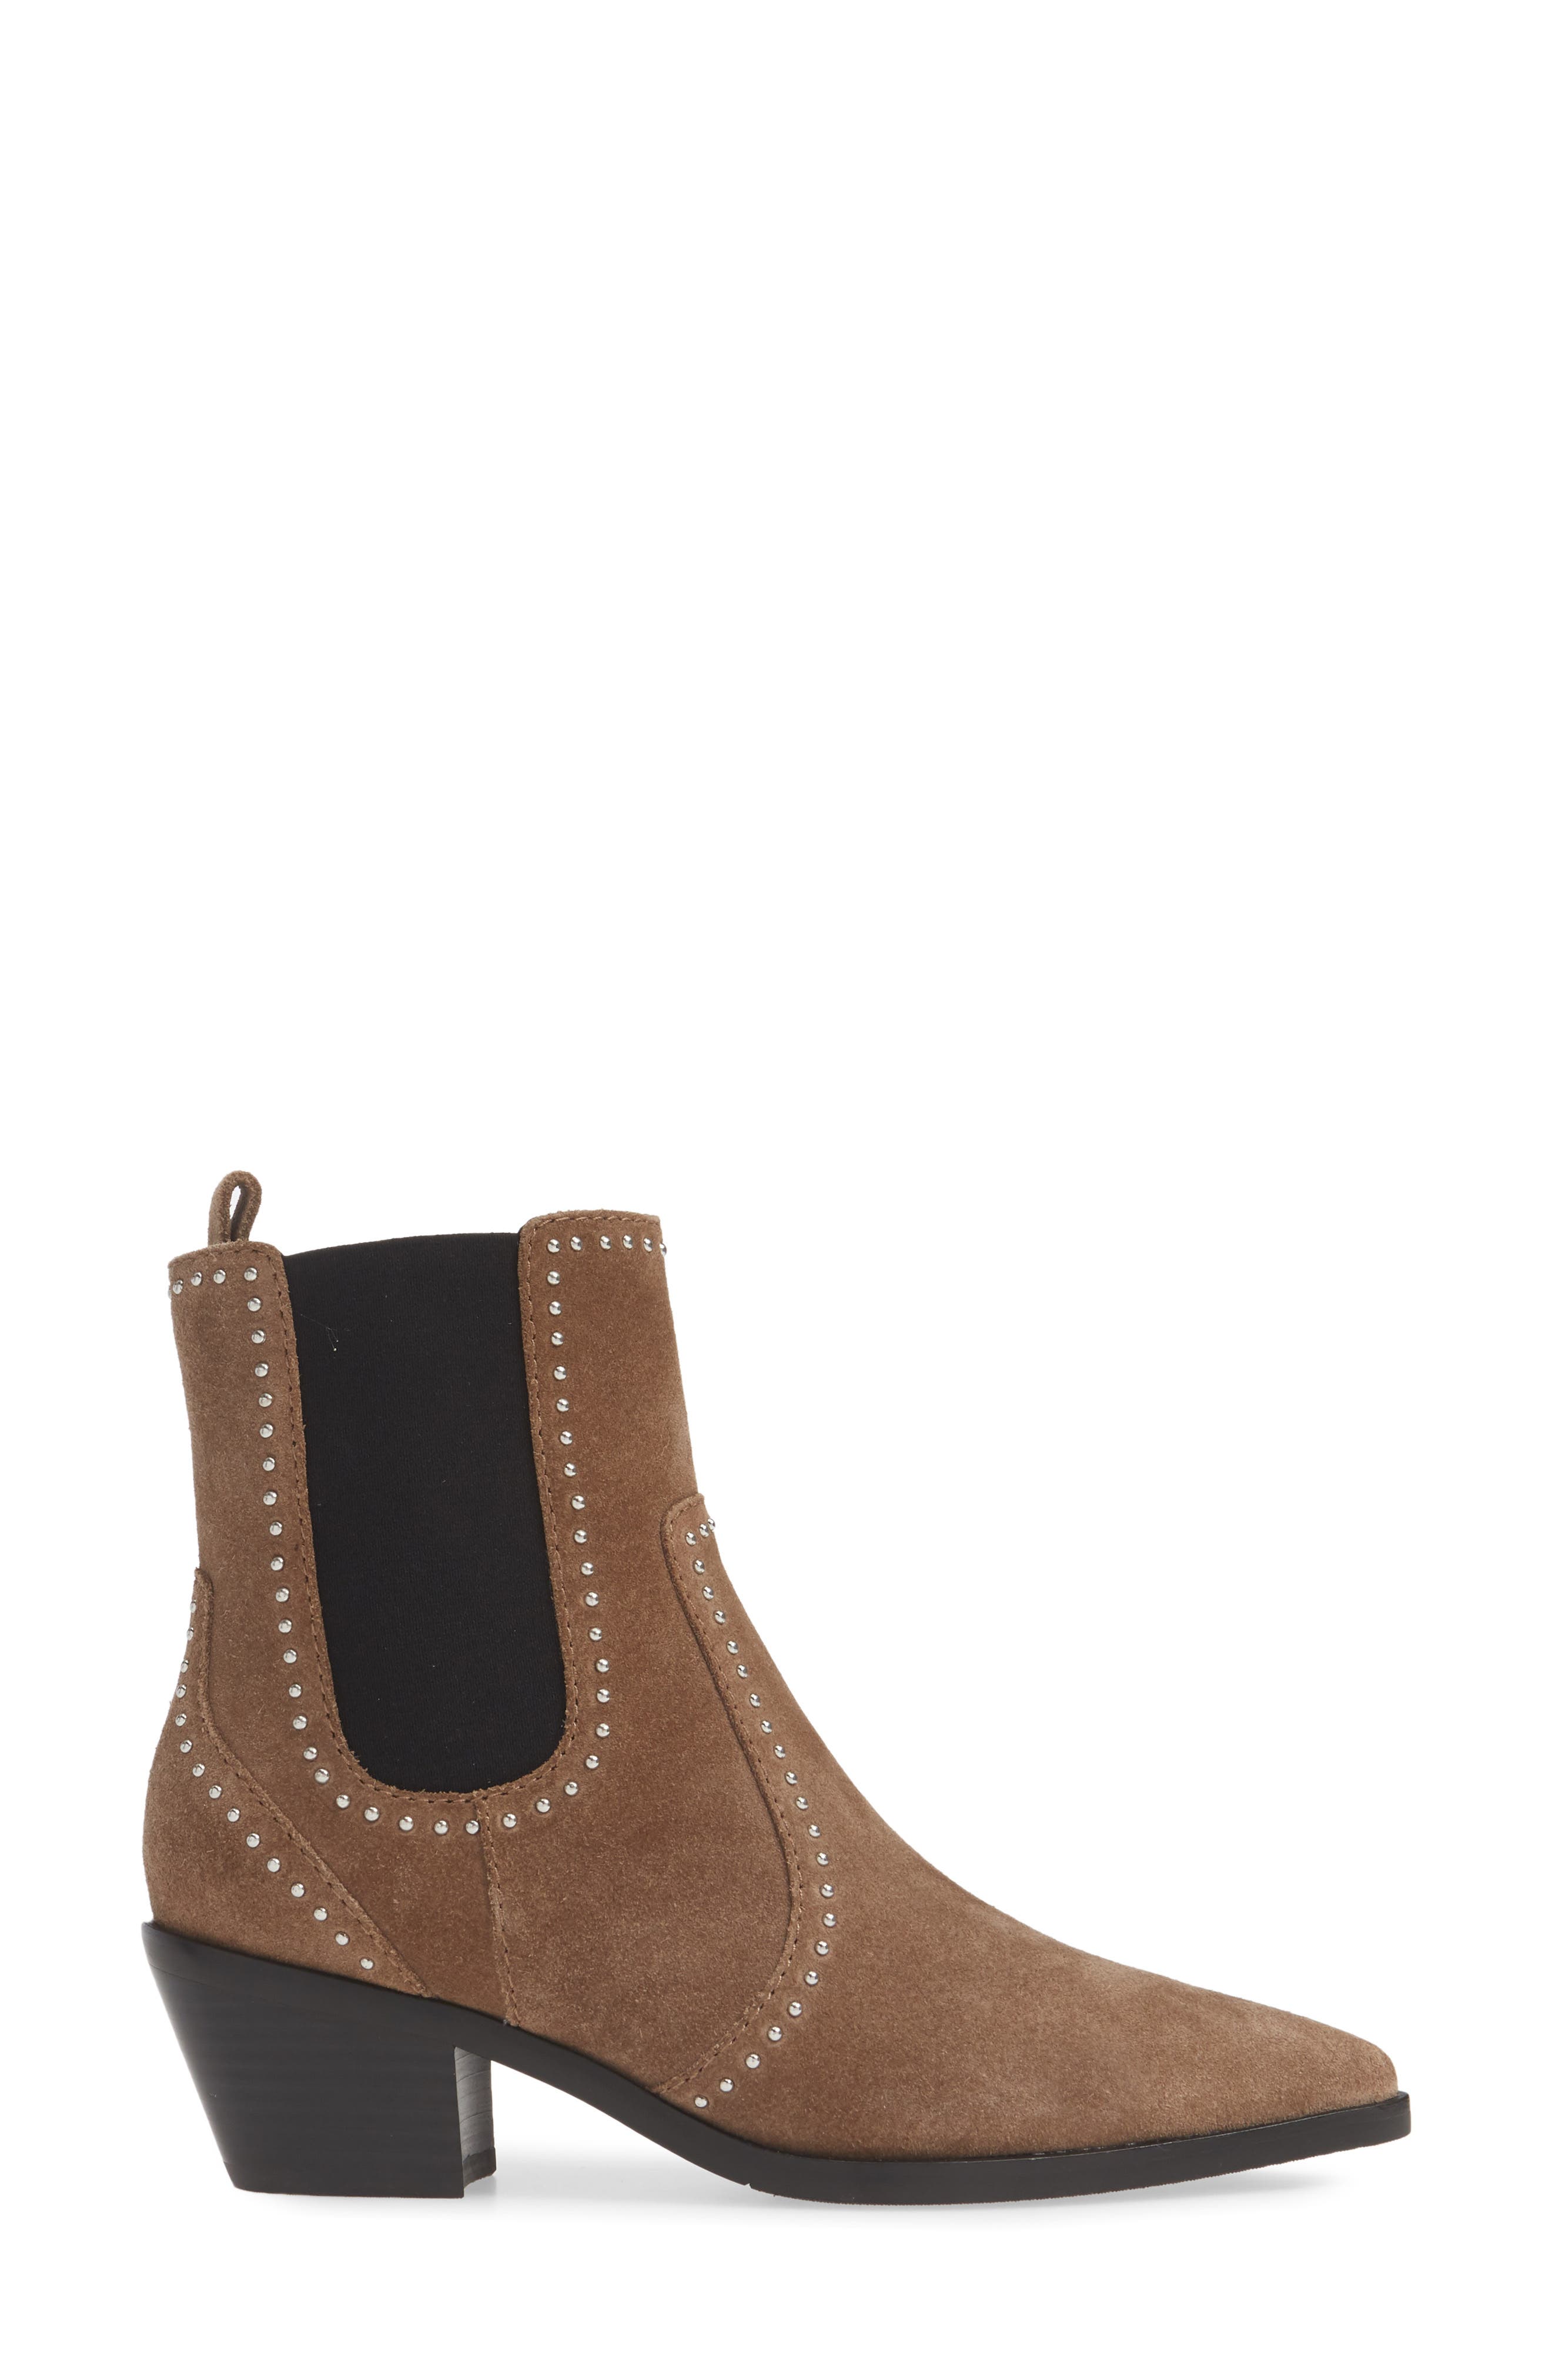 Paige Willa Studded Leather Chelsea Boot In Beige/khaki | ModeSens